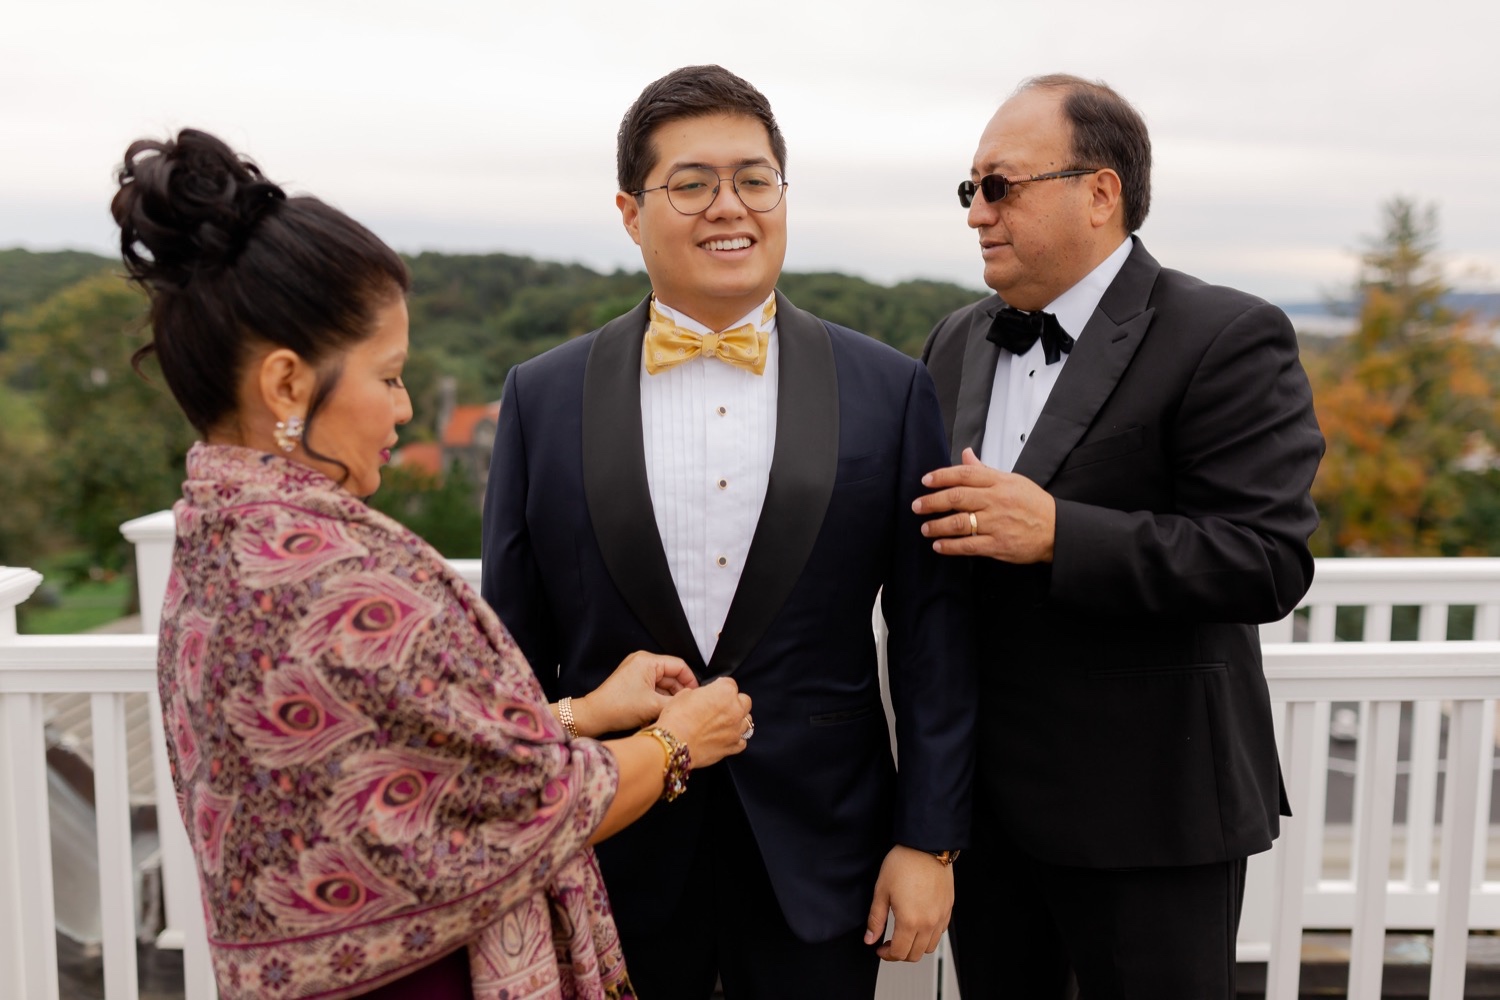 A groom wearing his wedding suit with a help from his family.